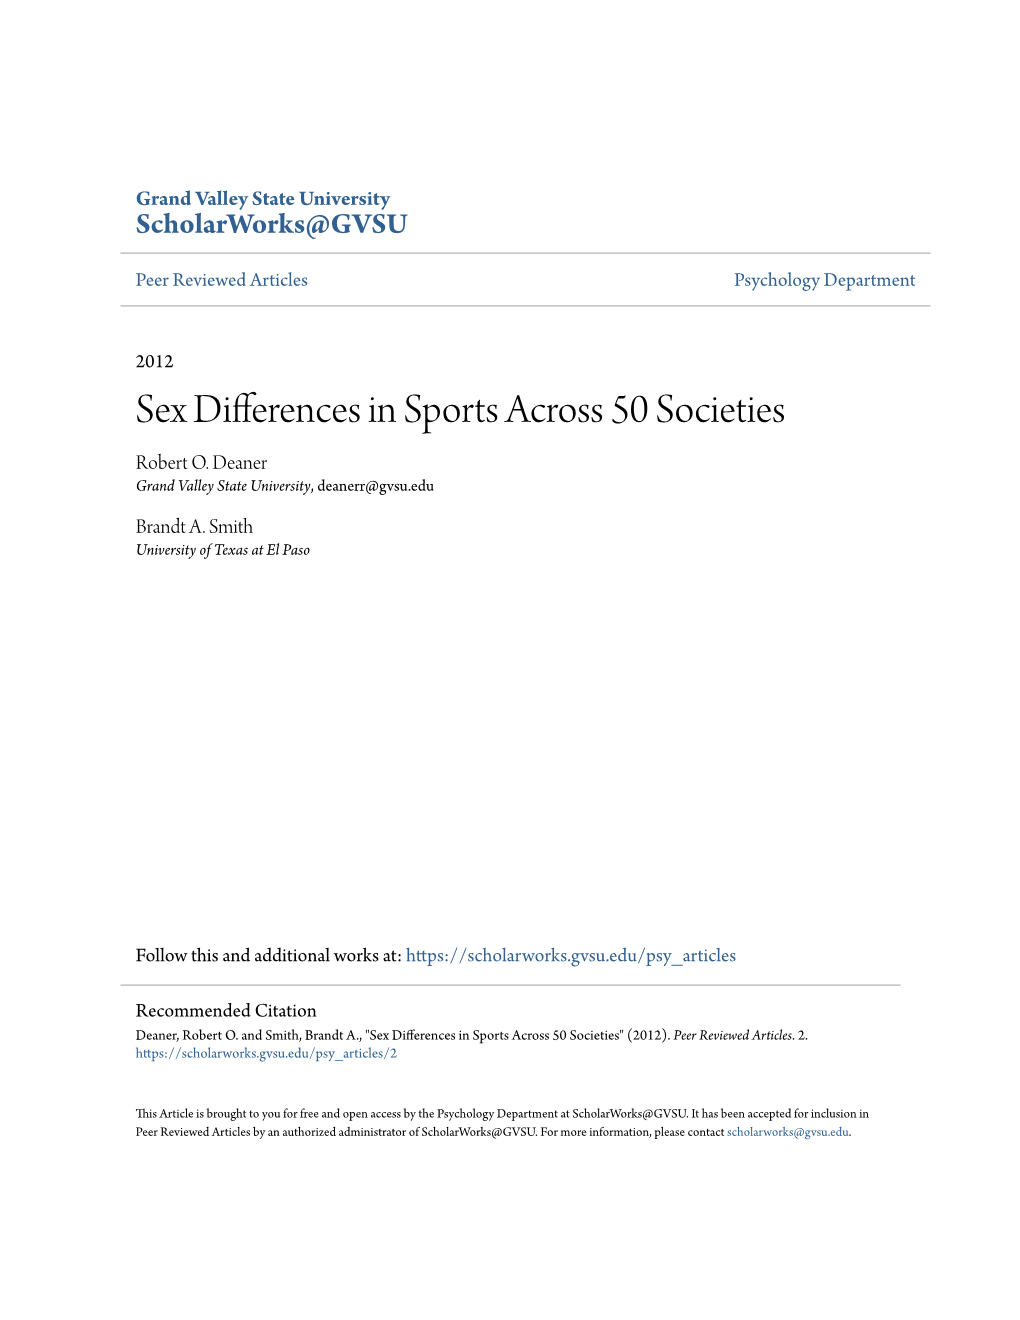 Sex Differences in Sports Across 50 Societies Robert O